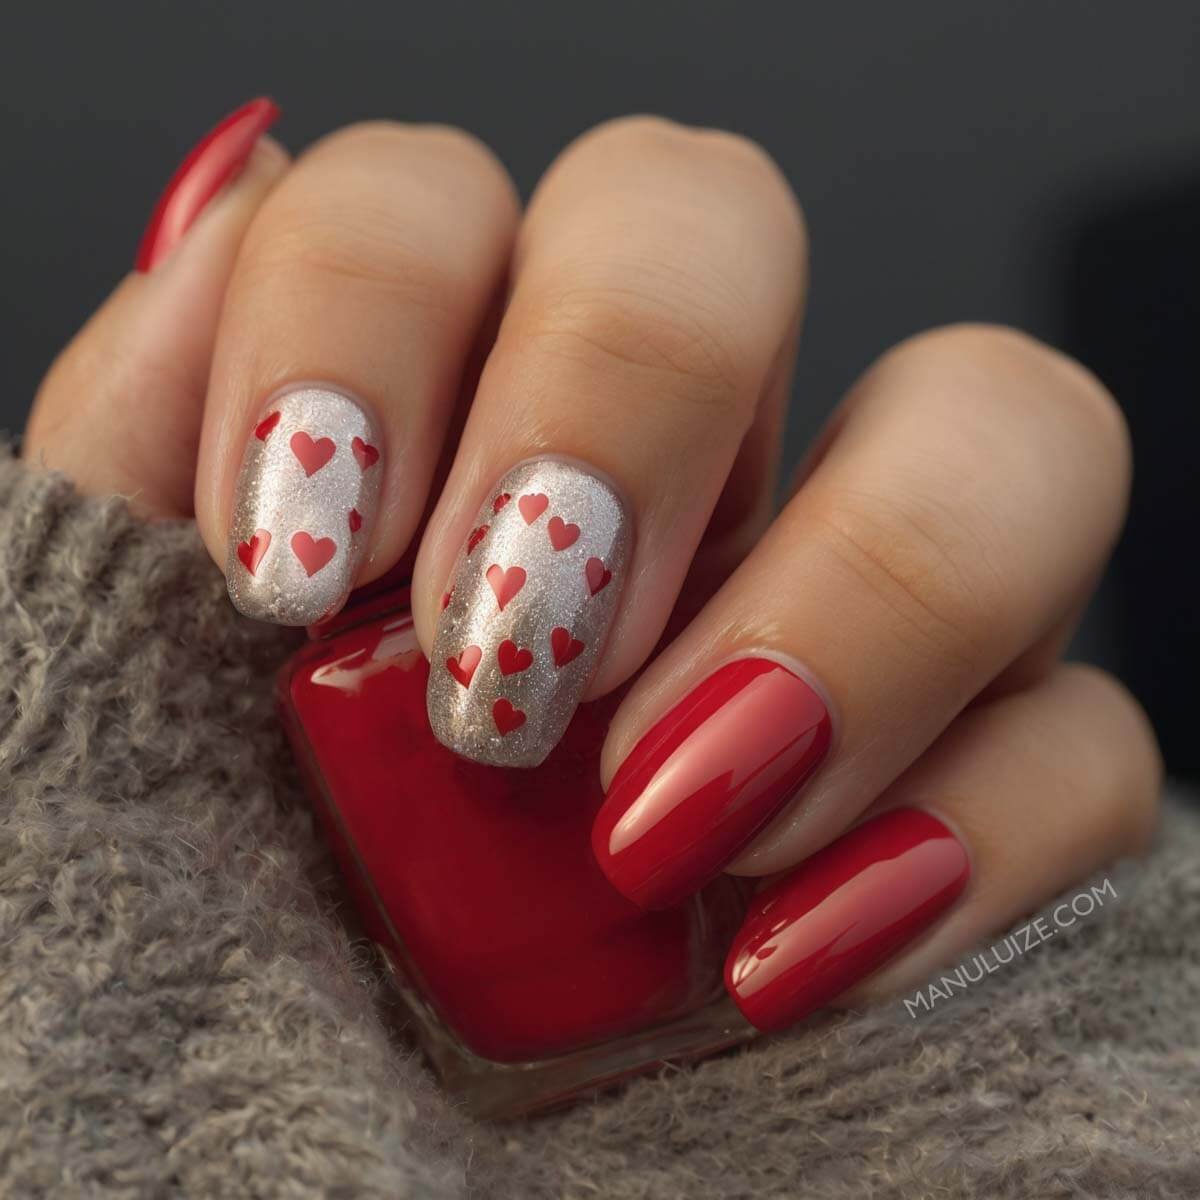 Red nails with hearts